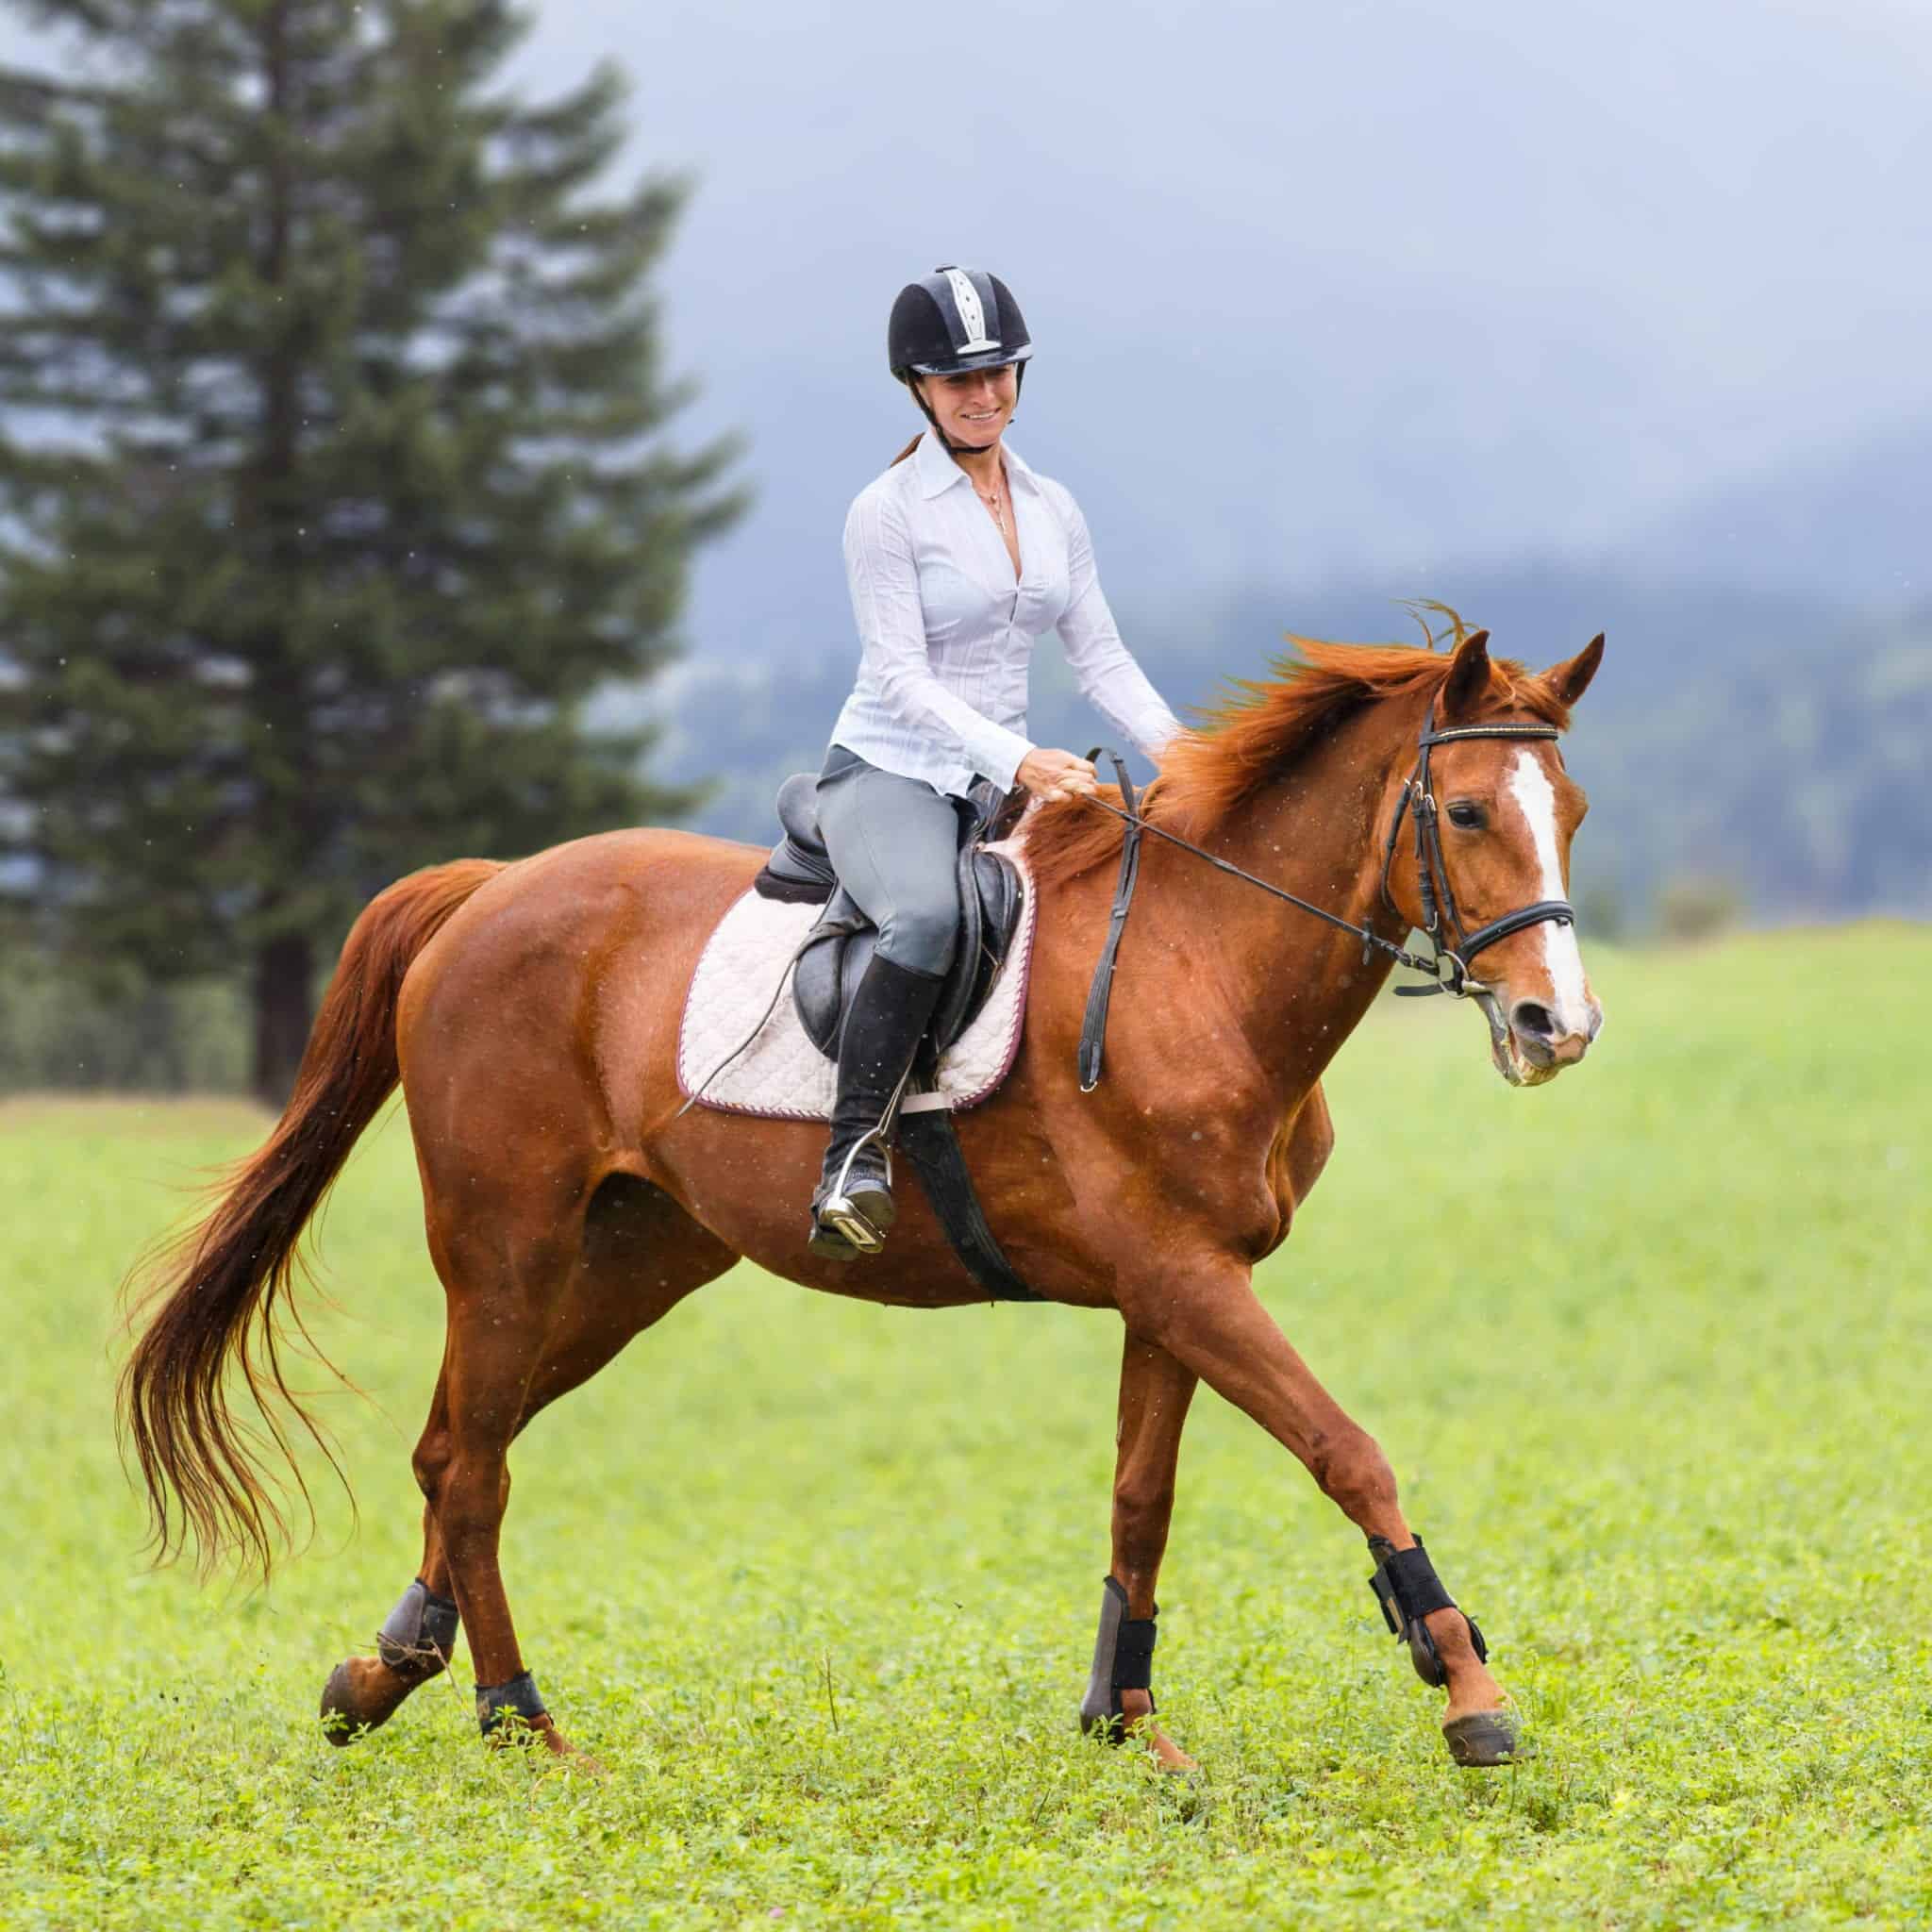 Young woman riding sorrel horse on green mountain meadow. Equestrian activity background